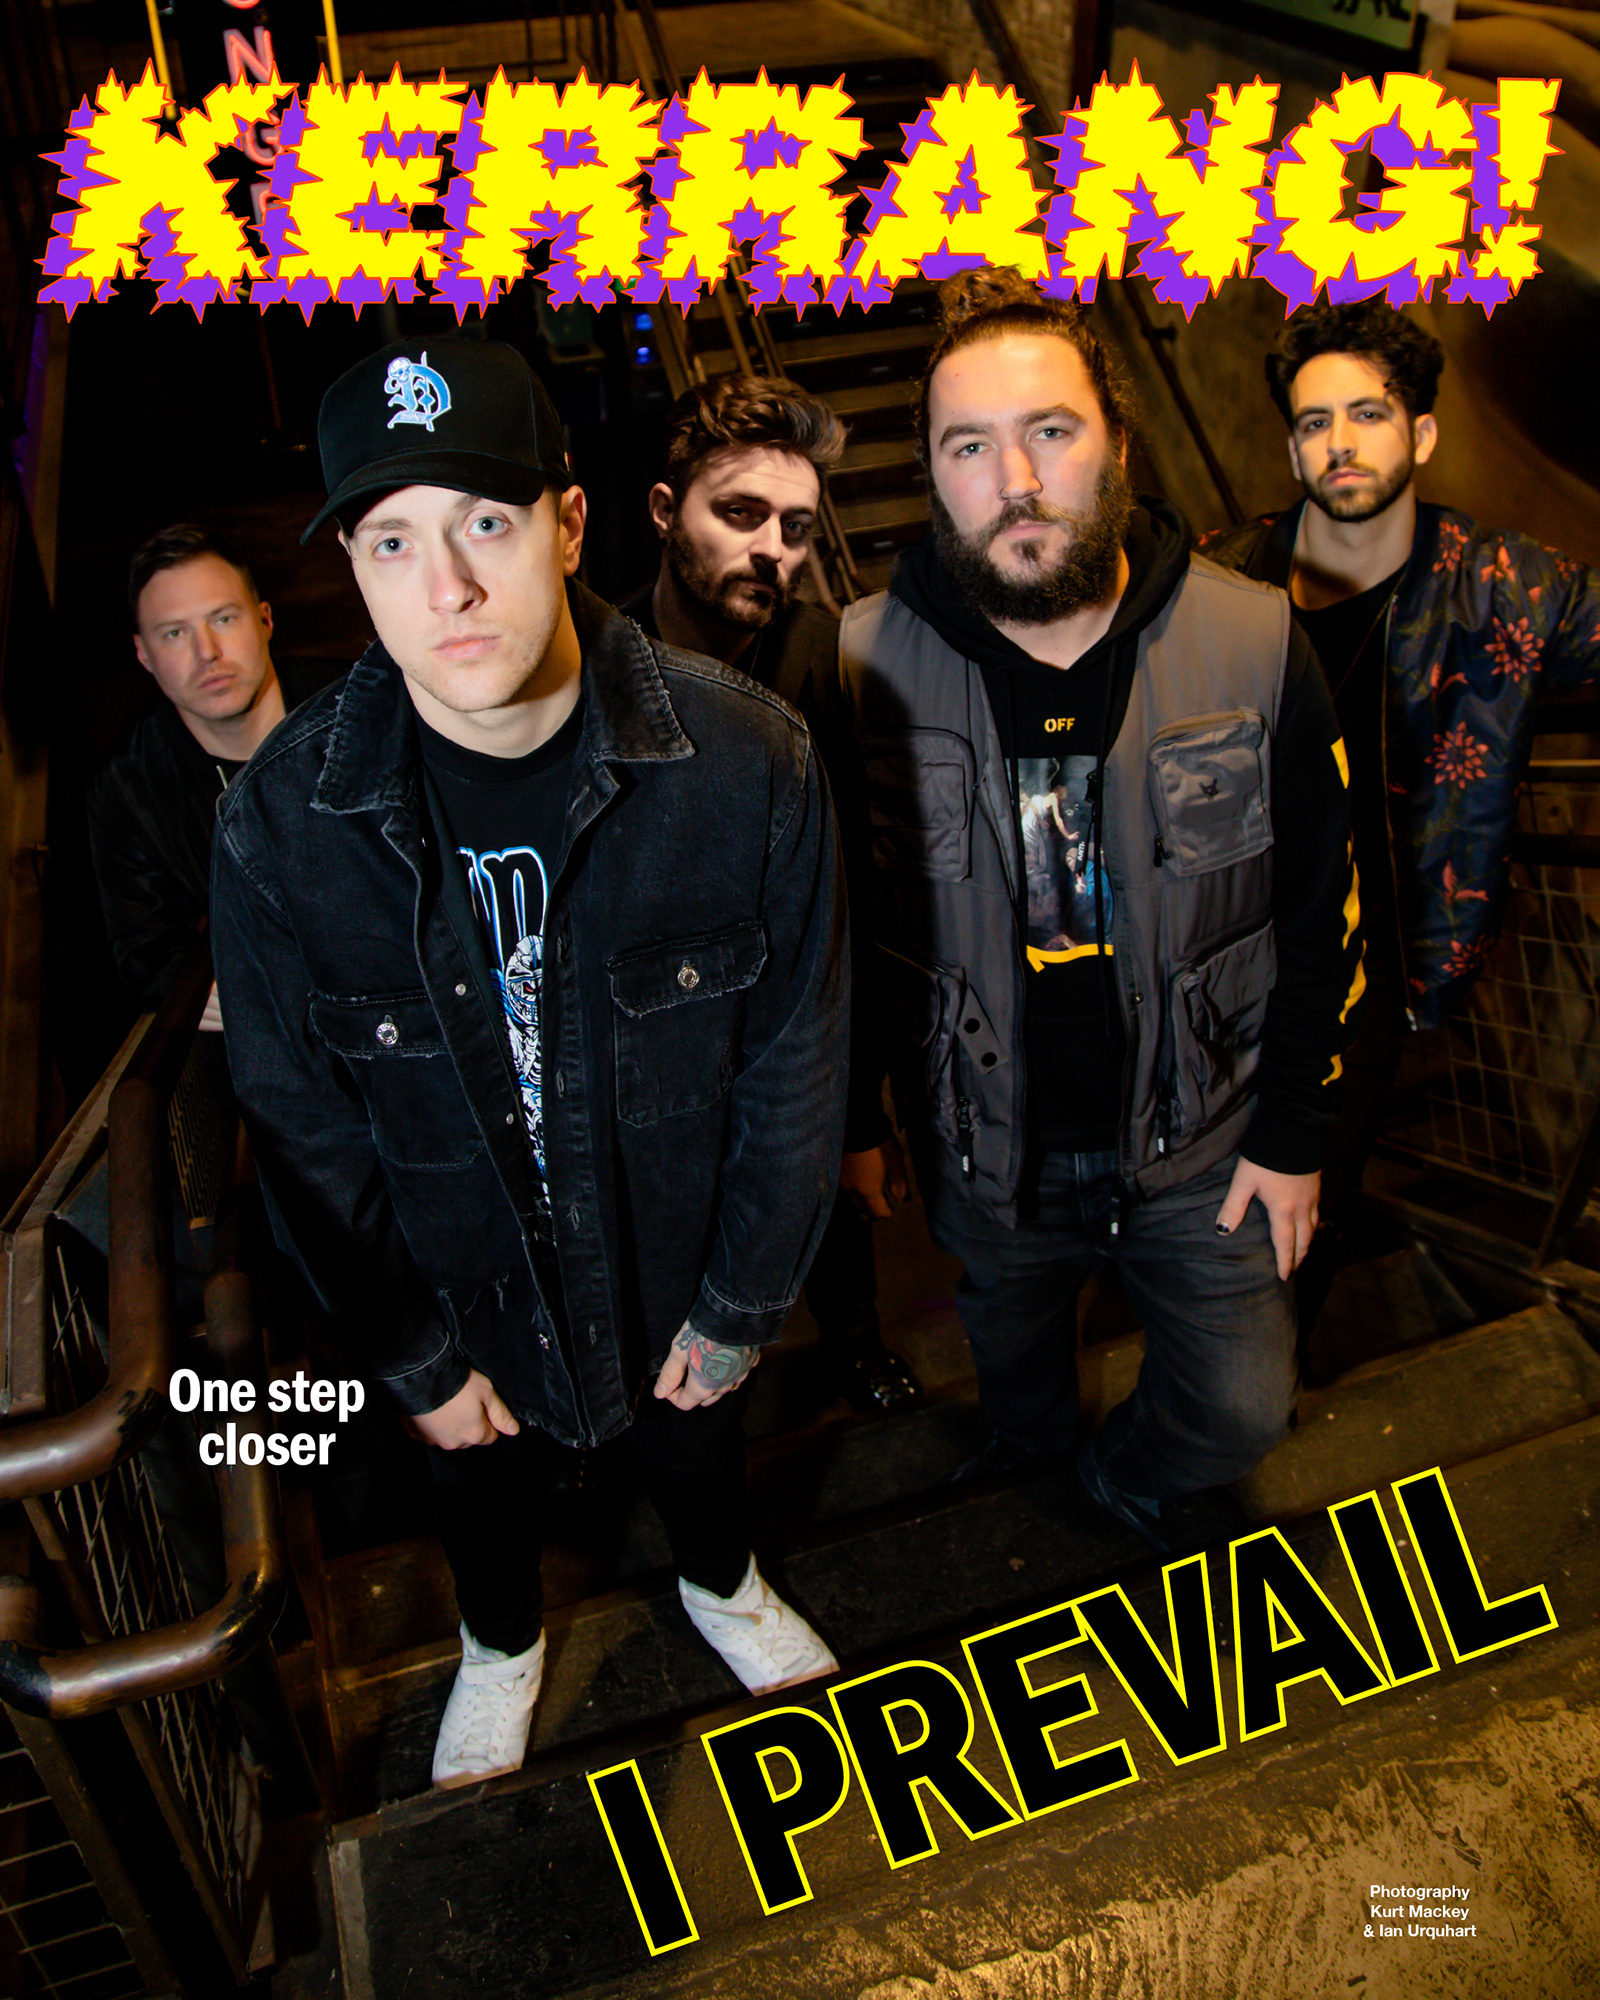 I Prevail, Discography, Members